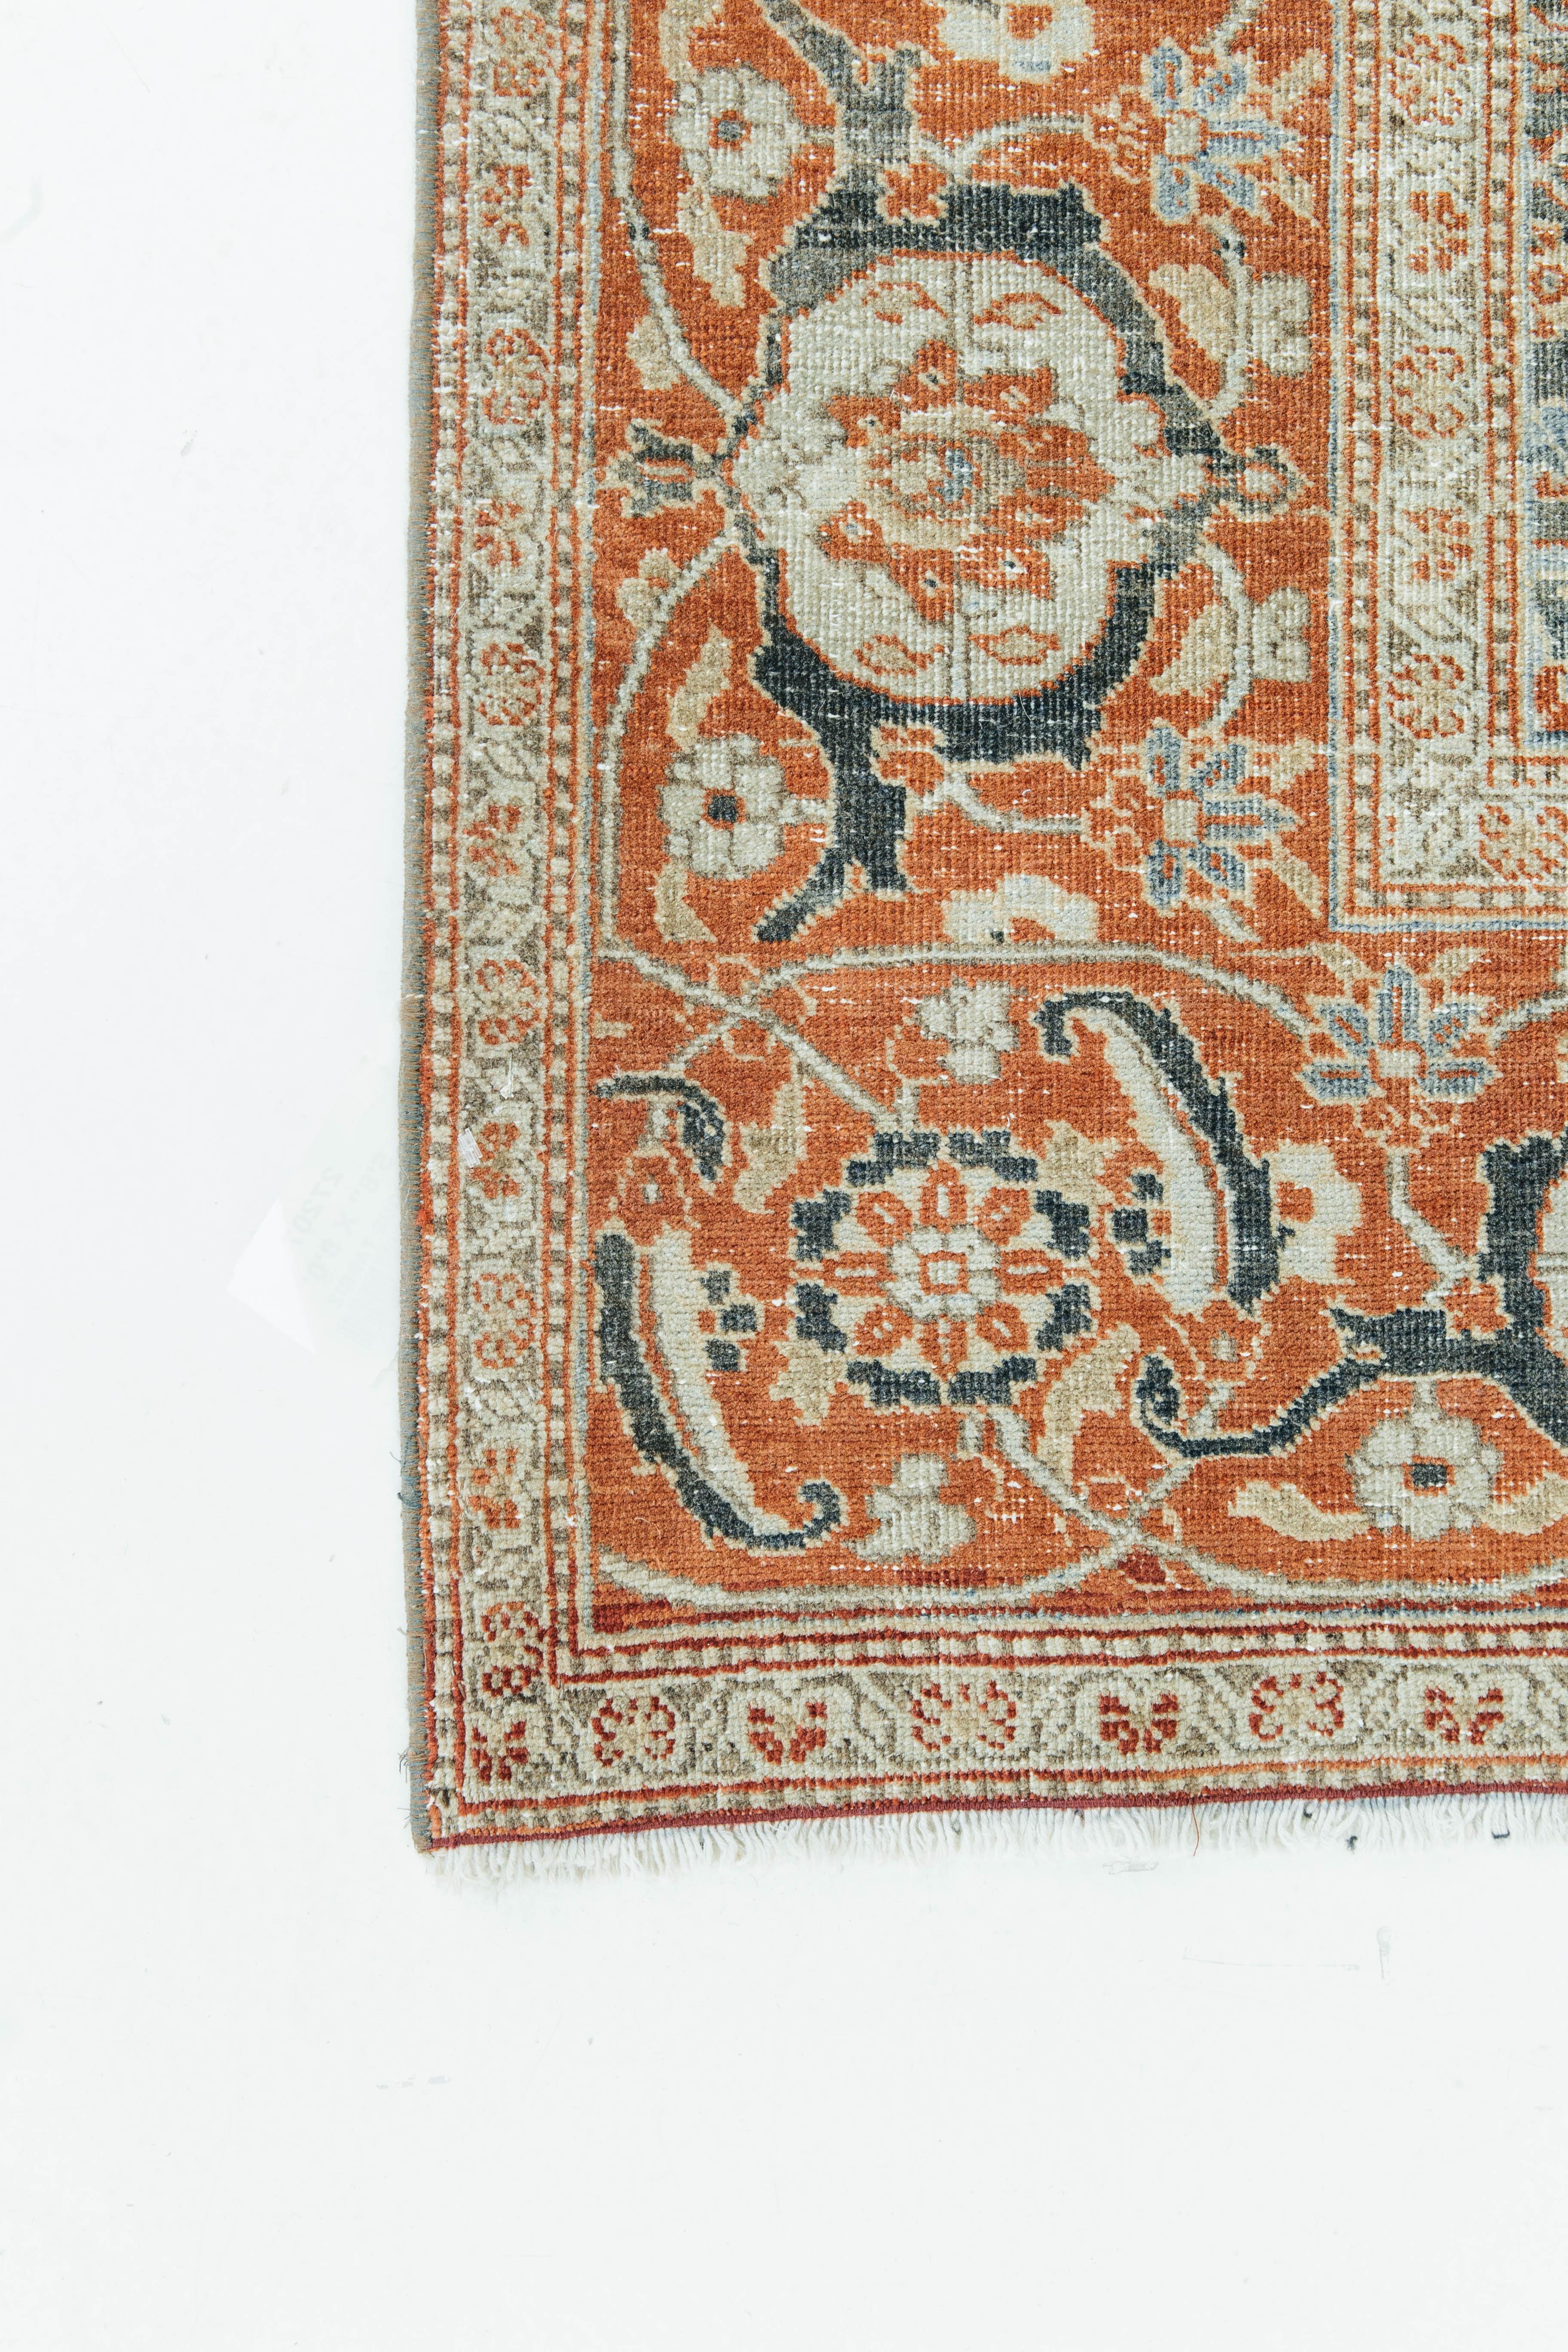 An antique Persian Tabriz embezzled with intricate medallions throughout the piece. Tribal Tabriz patterns bring an elegant touch to any setting due to their intricacy in design as well as their quality of wool. Luxurious colors of deep orange,